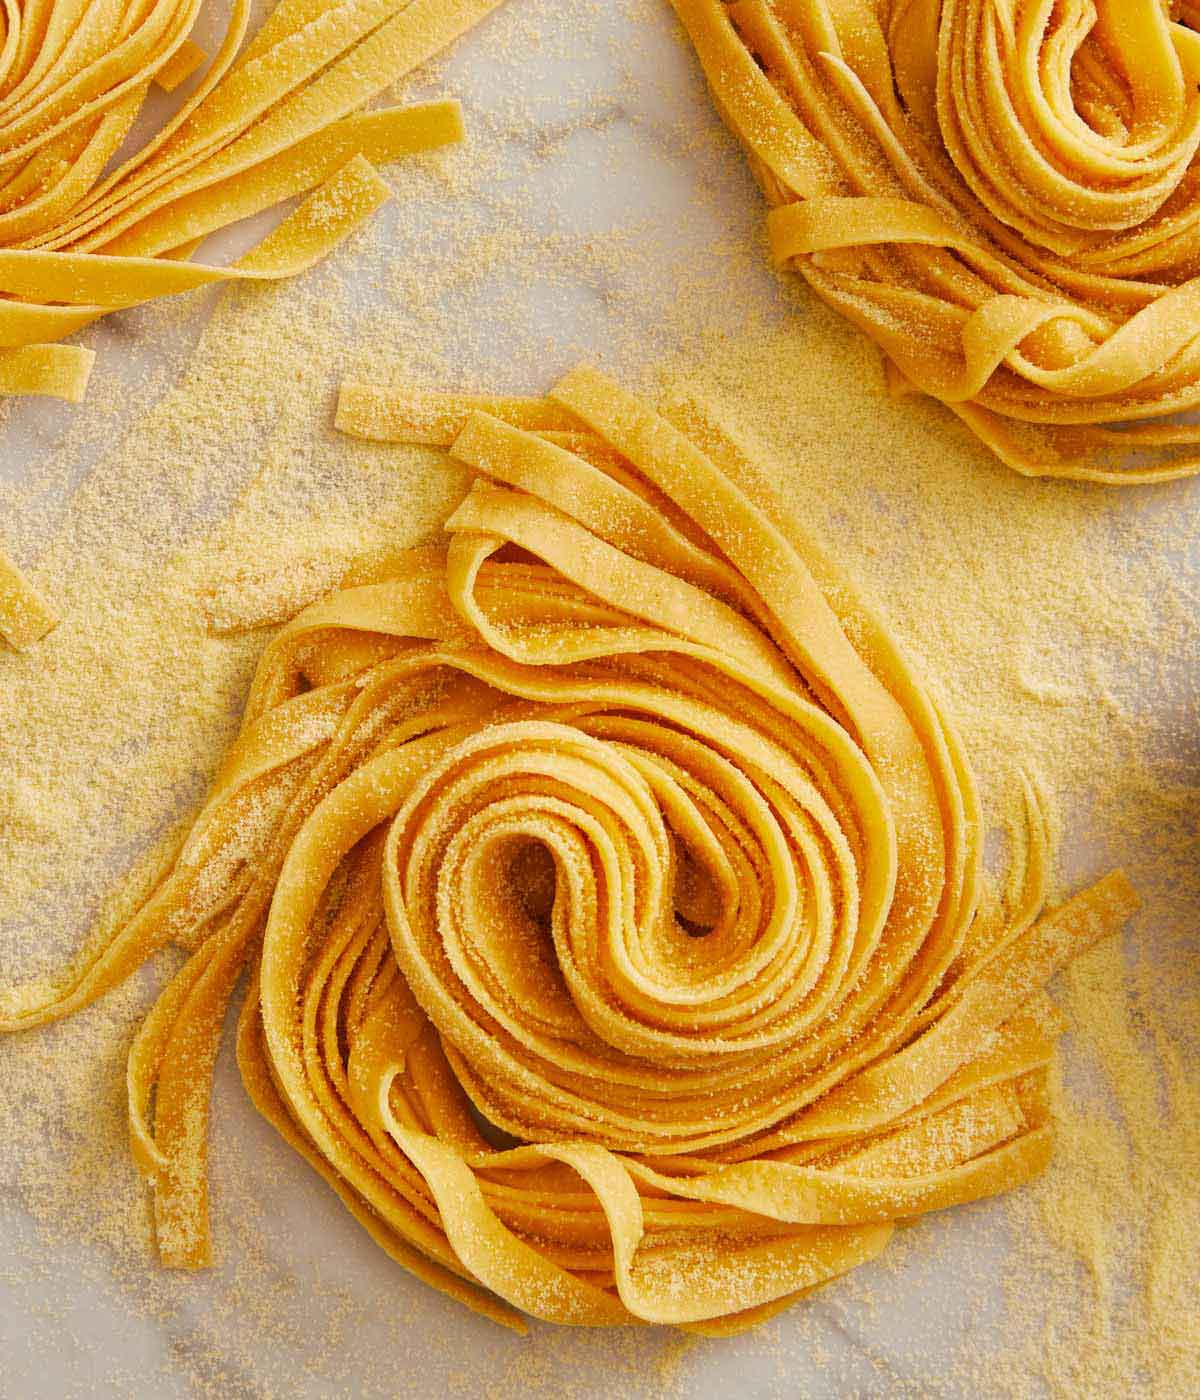 Overhead view of a bundle of long strands of pasta dough with semolina flour sprinkled on top.